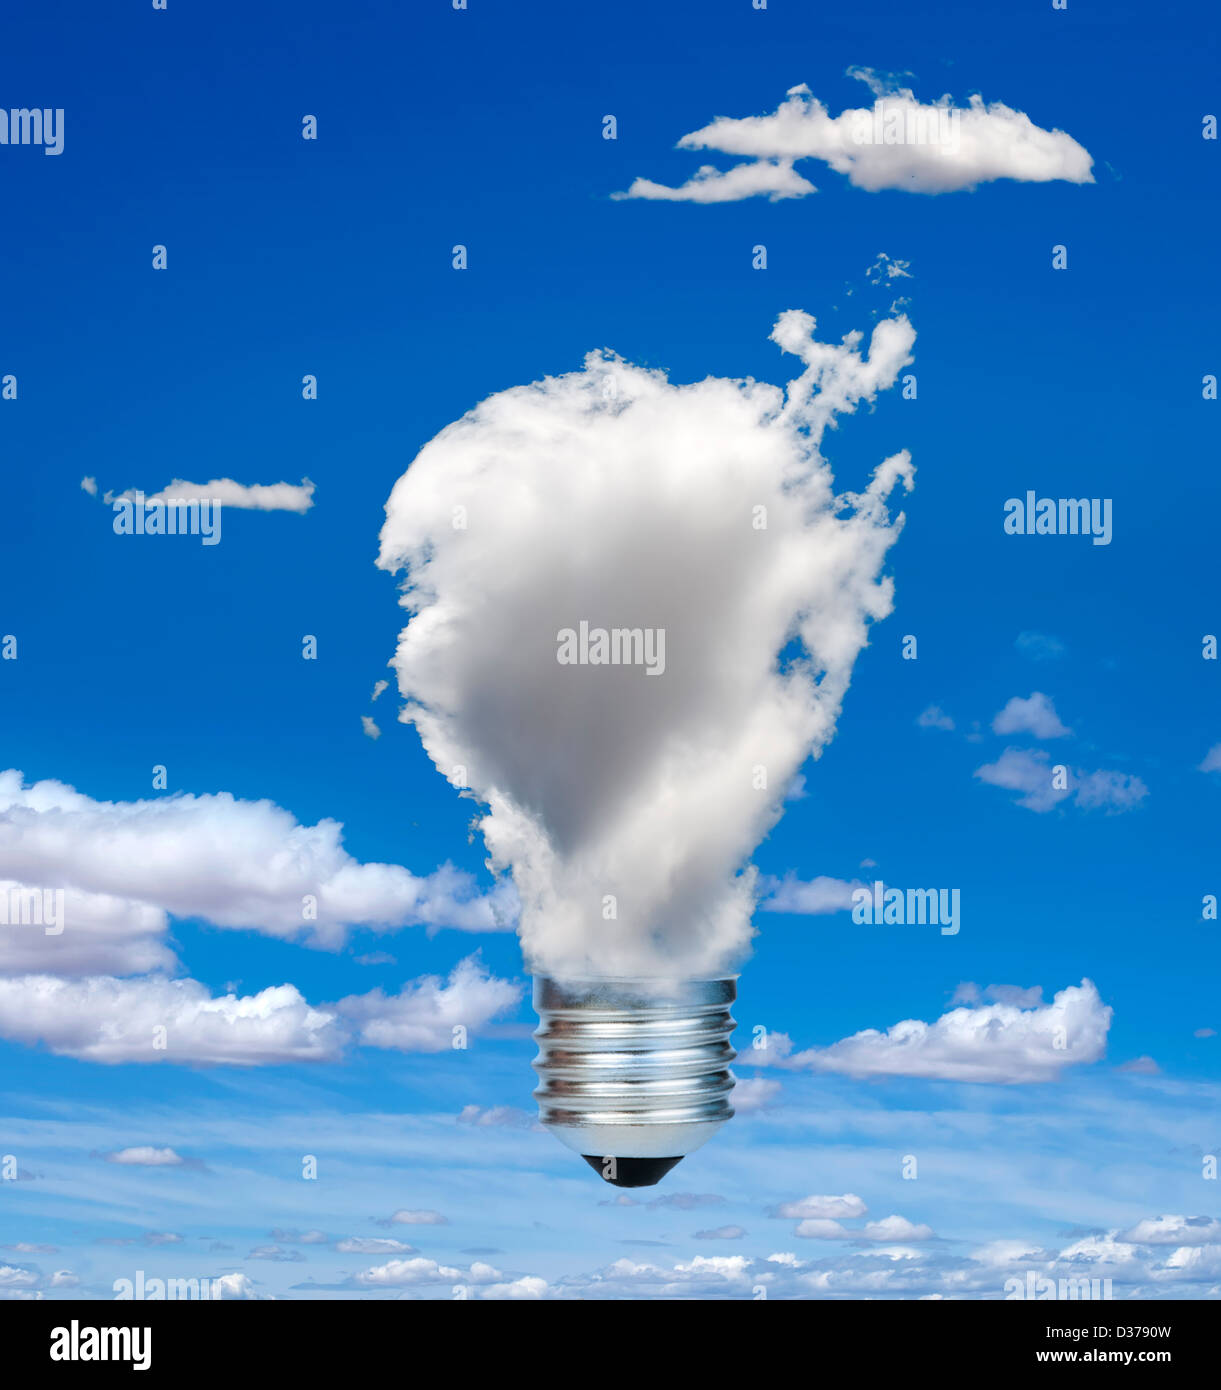 Lamp made of clouds. Ecology conception. Blue sky. Stock Photo